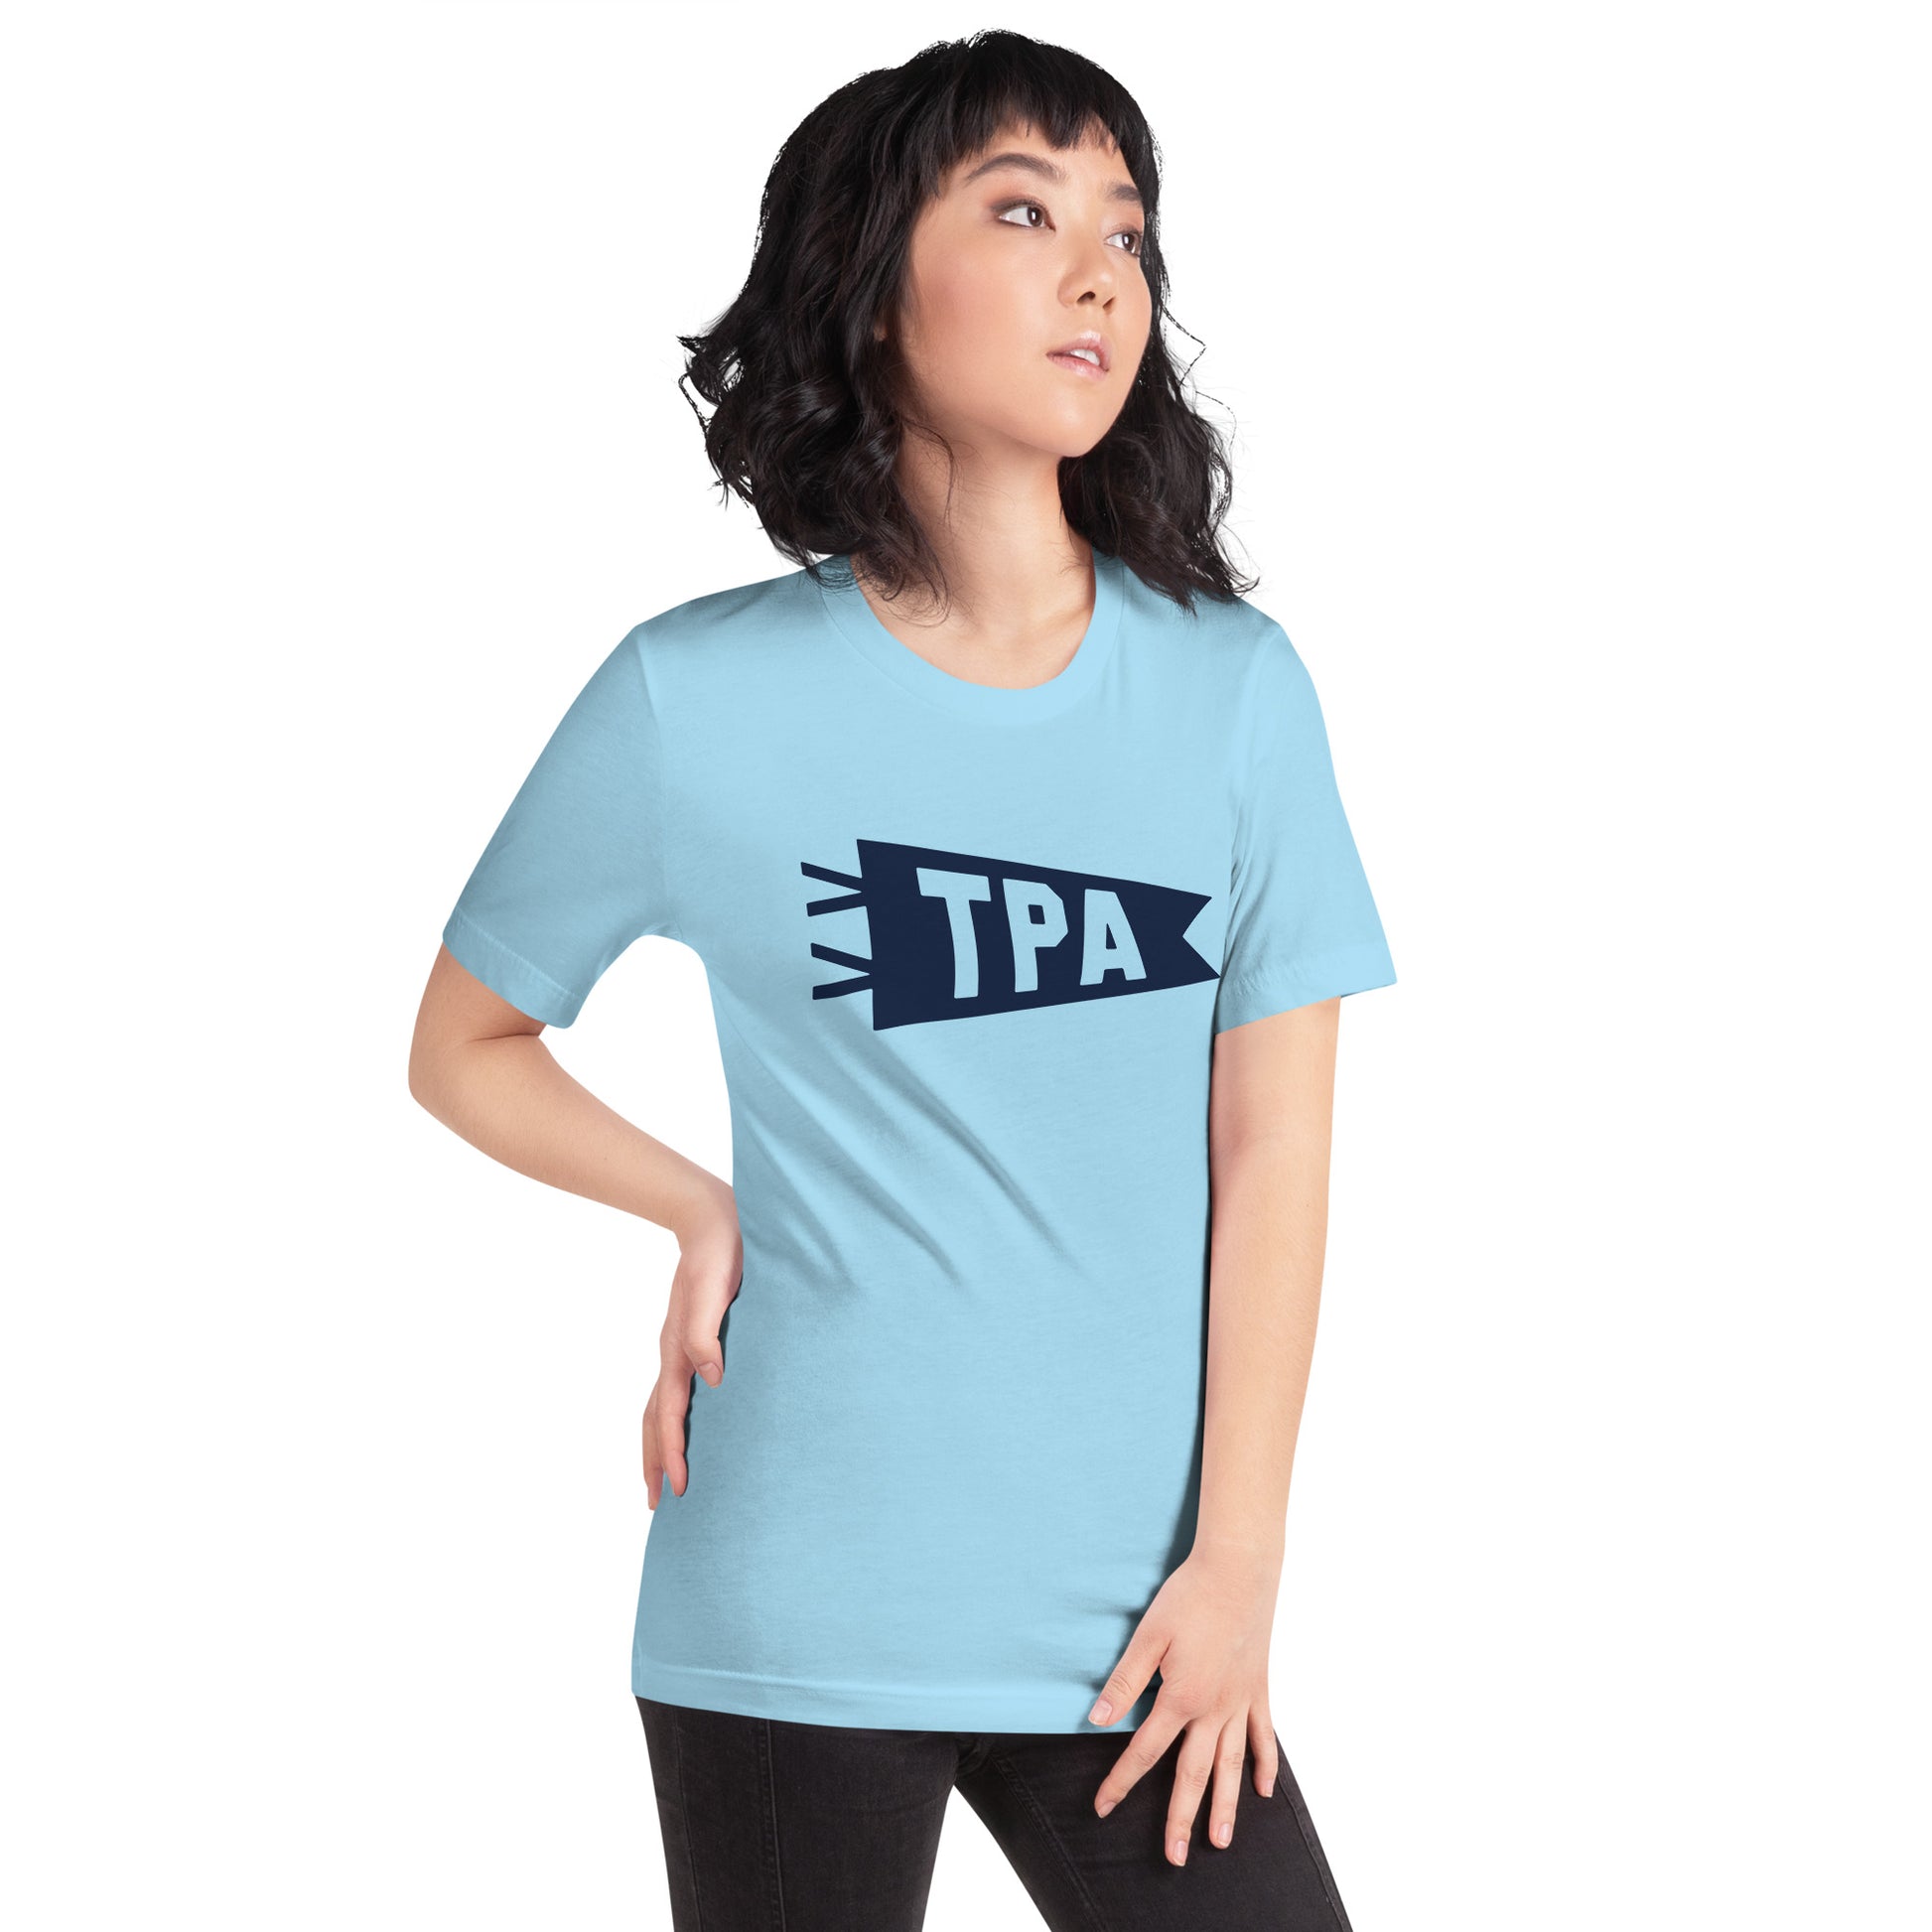 Airport Code T-Shirt - Navy Blue Graphic • TPA Tampa • YHM Designs - Image 07